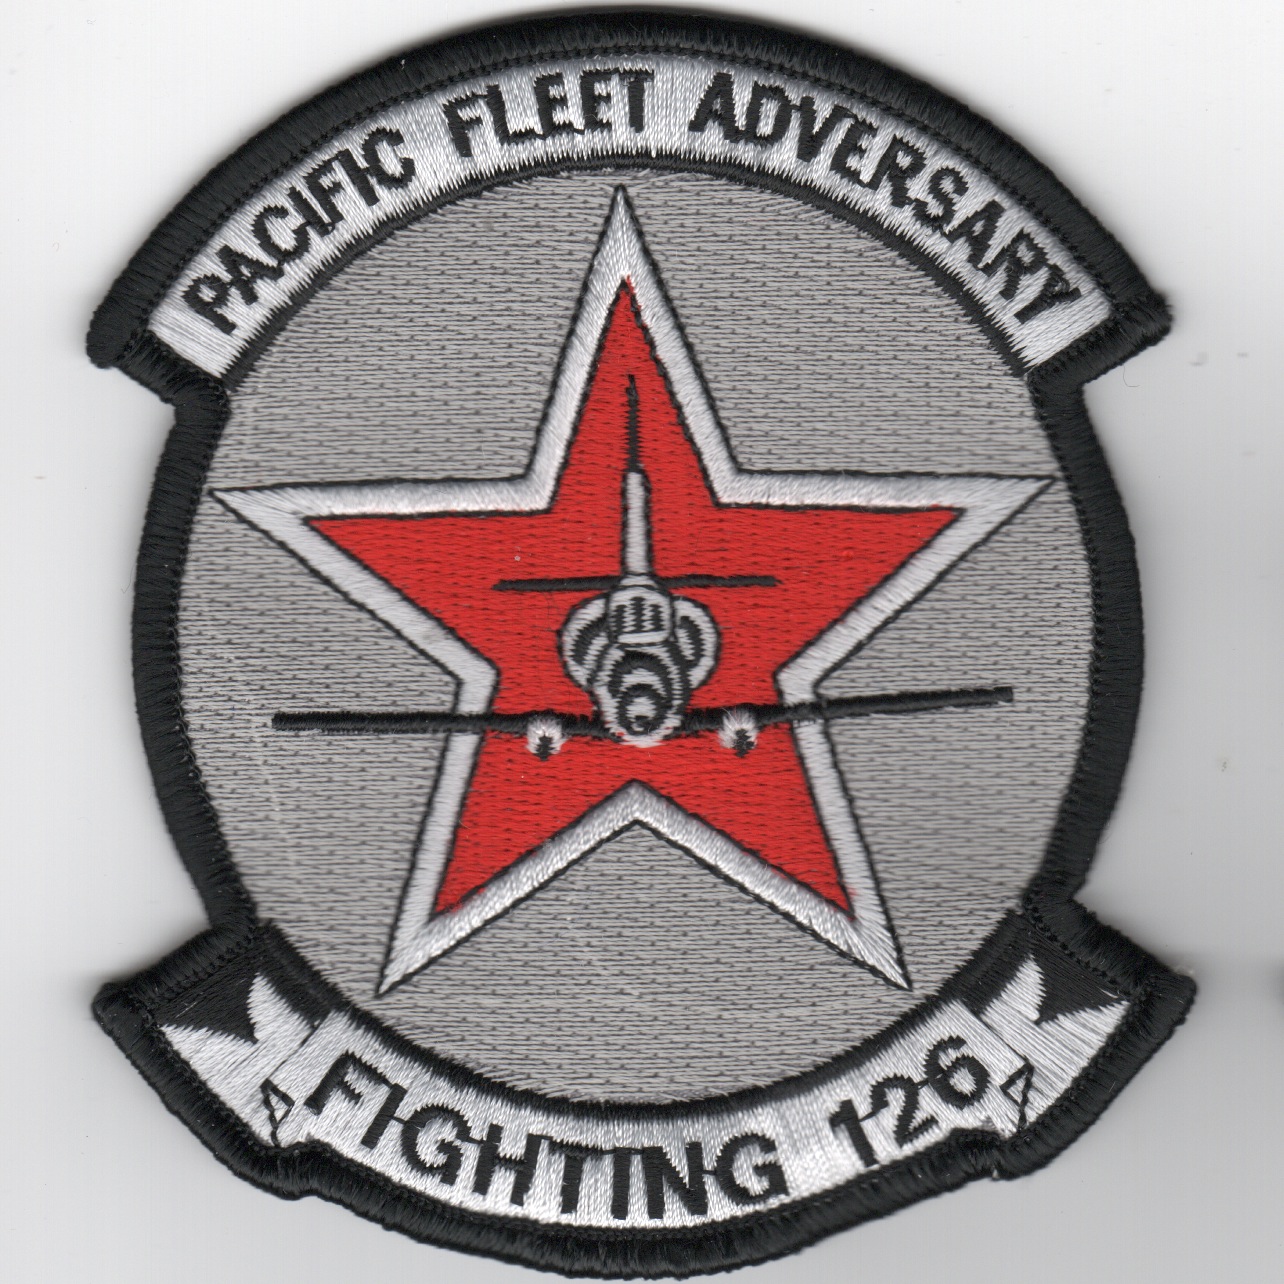 VF-126 Squadron Patch (A-4/Star)